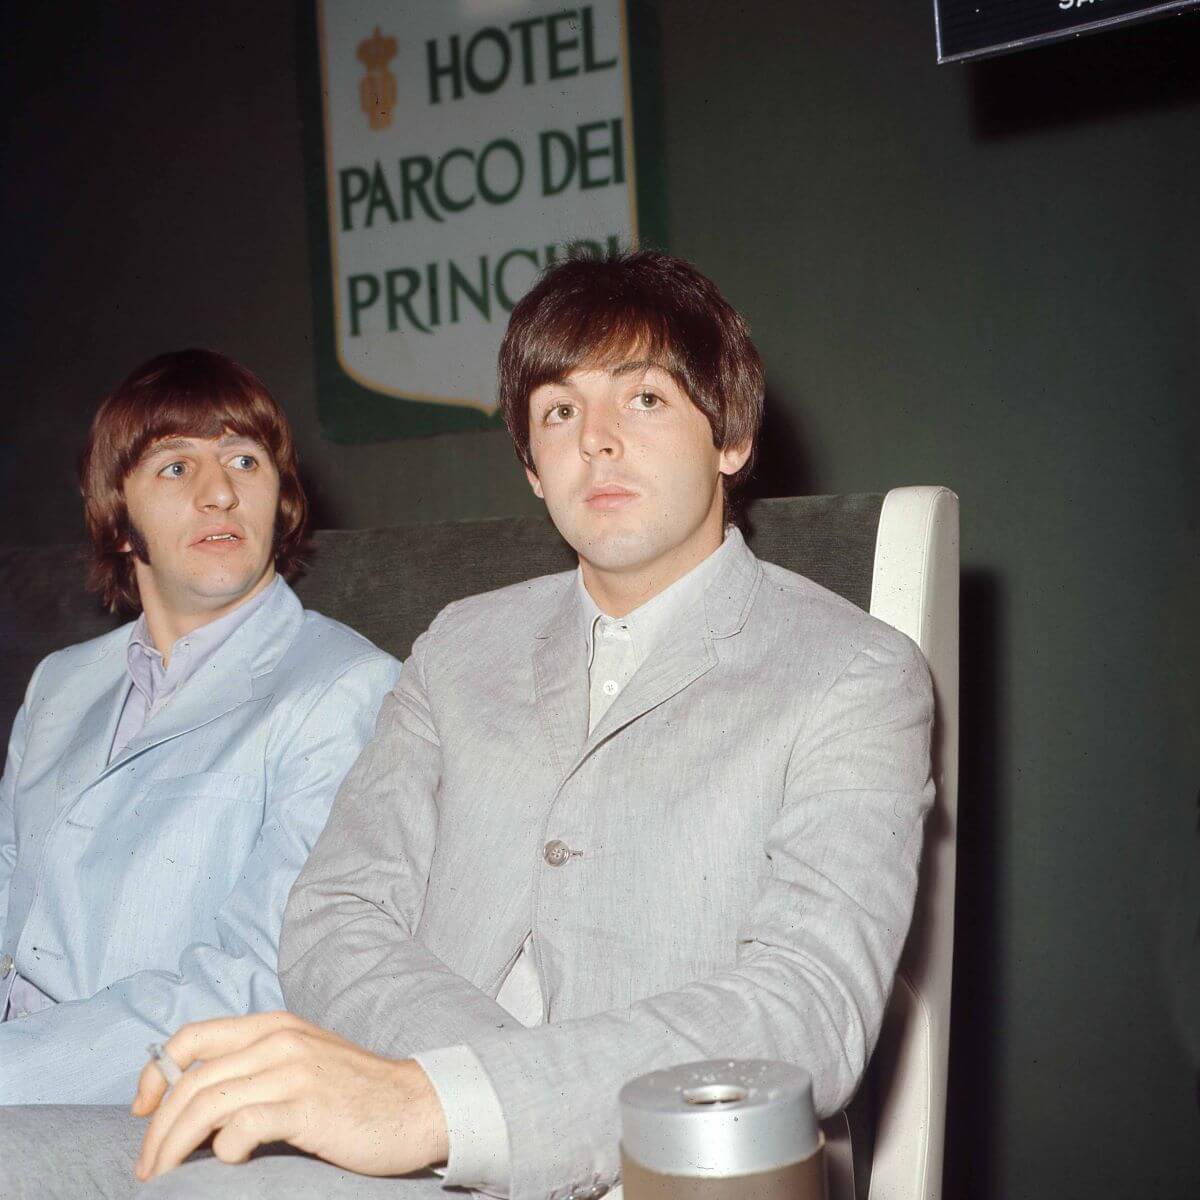 Ringo Starr and Paul McCartney sit next to each other on the same side of a table. Starr wears a blue suit and McCartney wears a gray one.